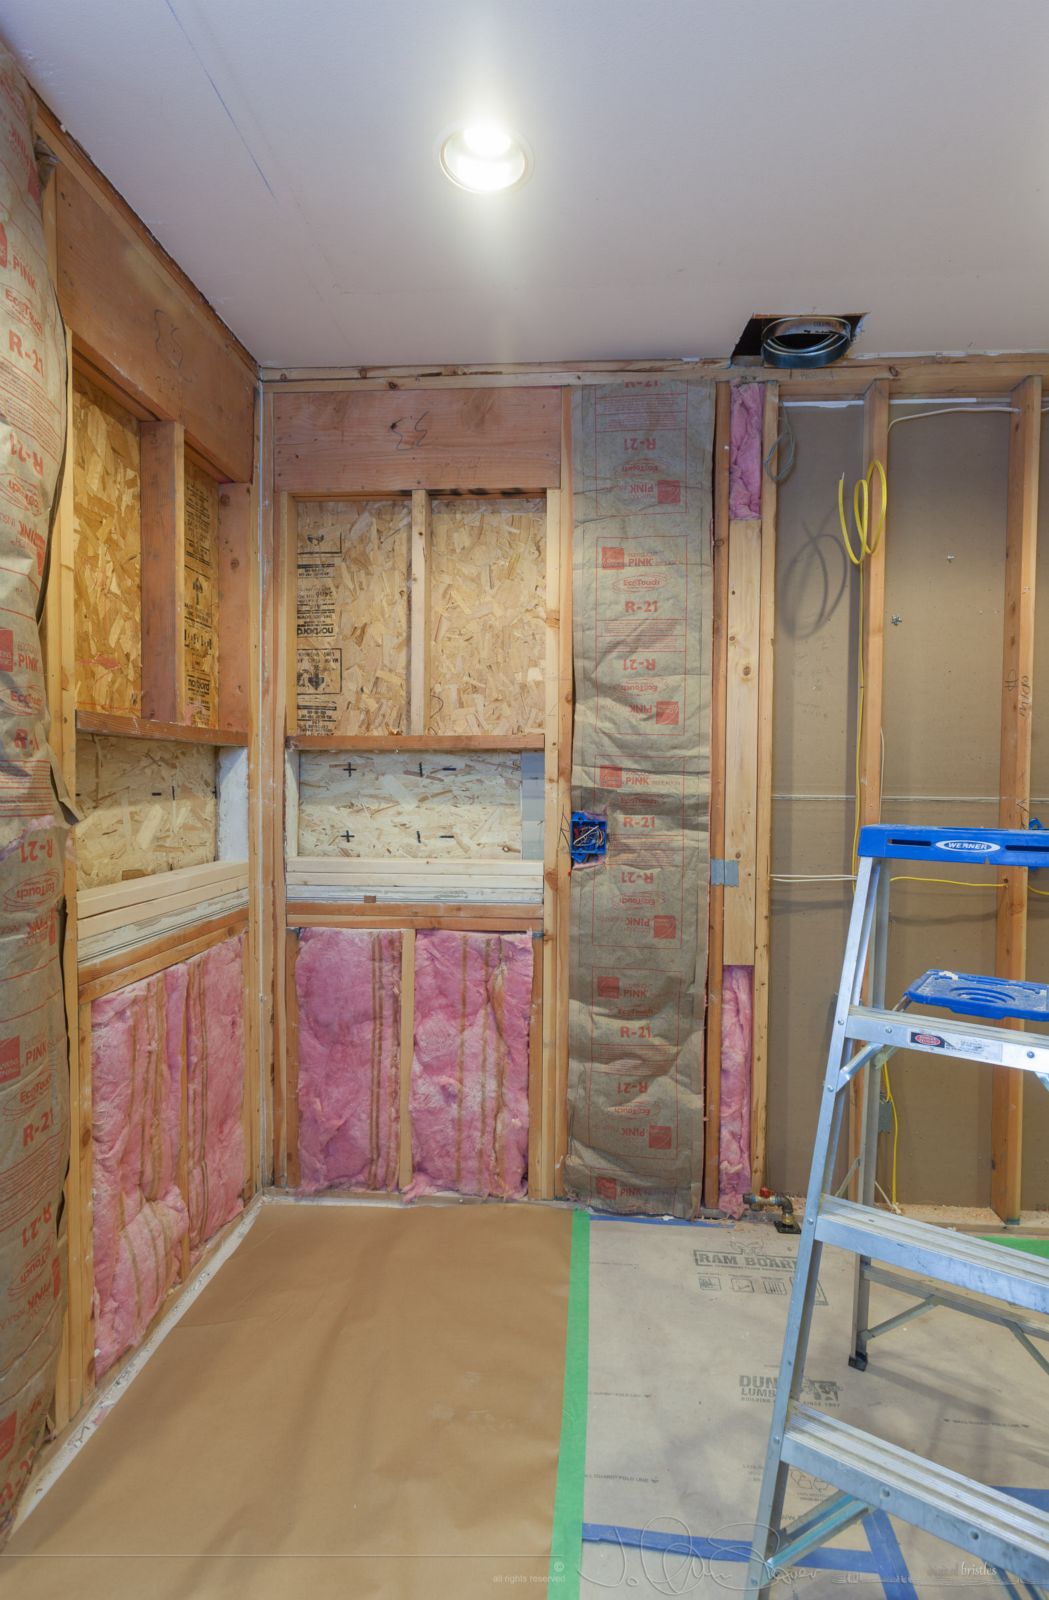 Insulate everything prior to drywall hanging. June 1st